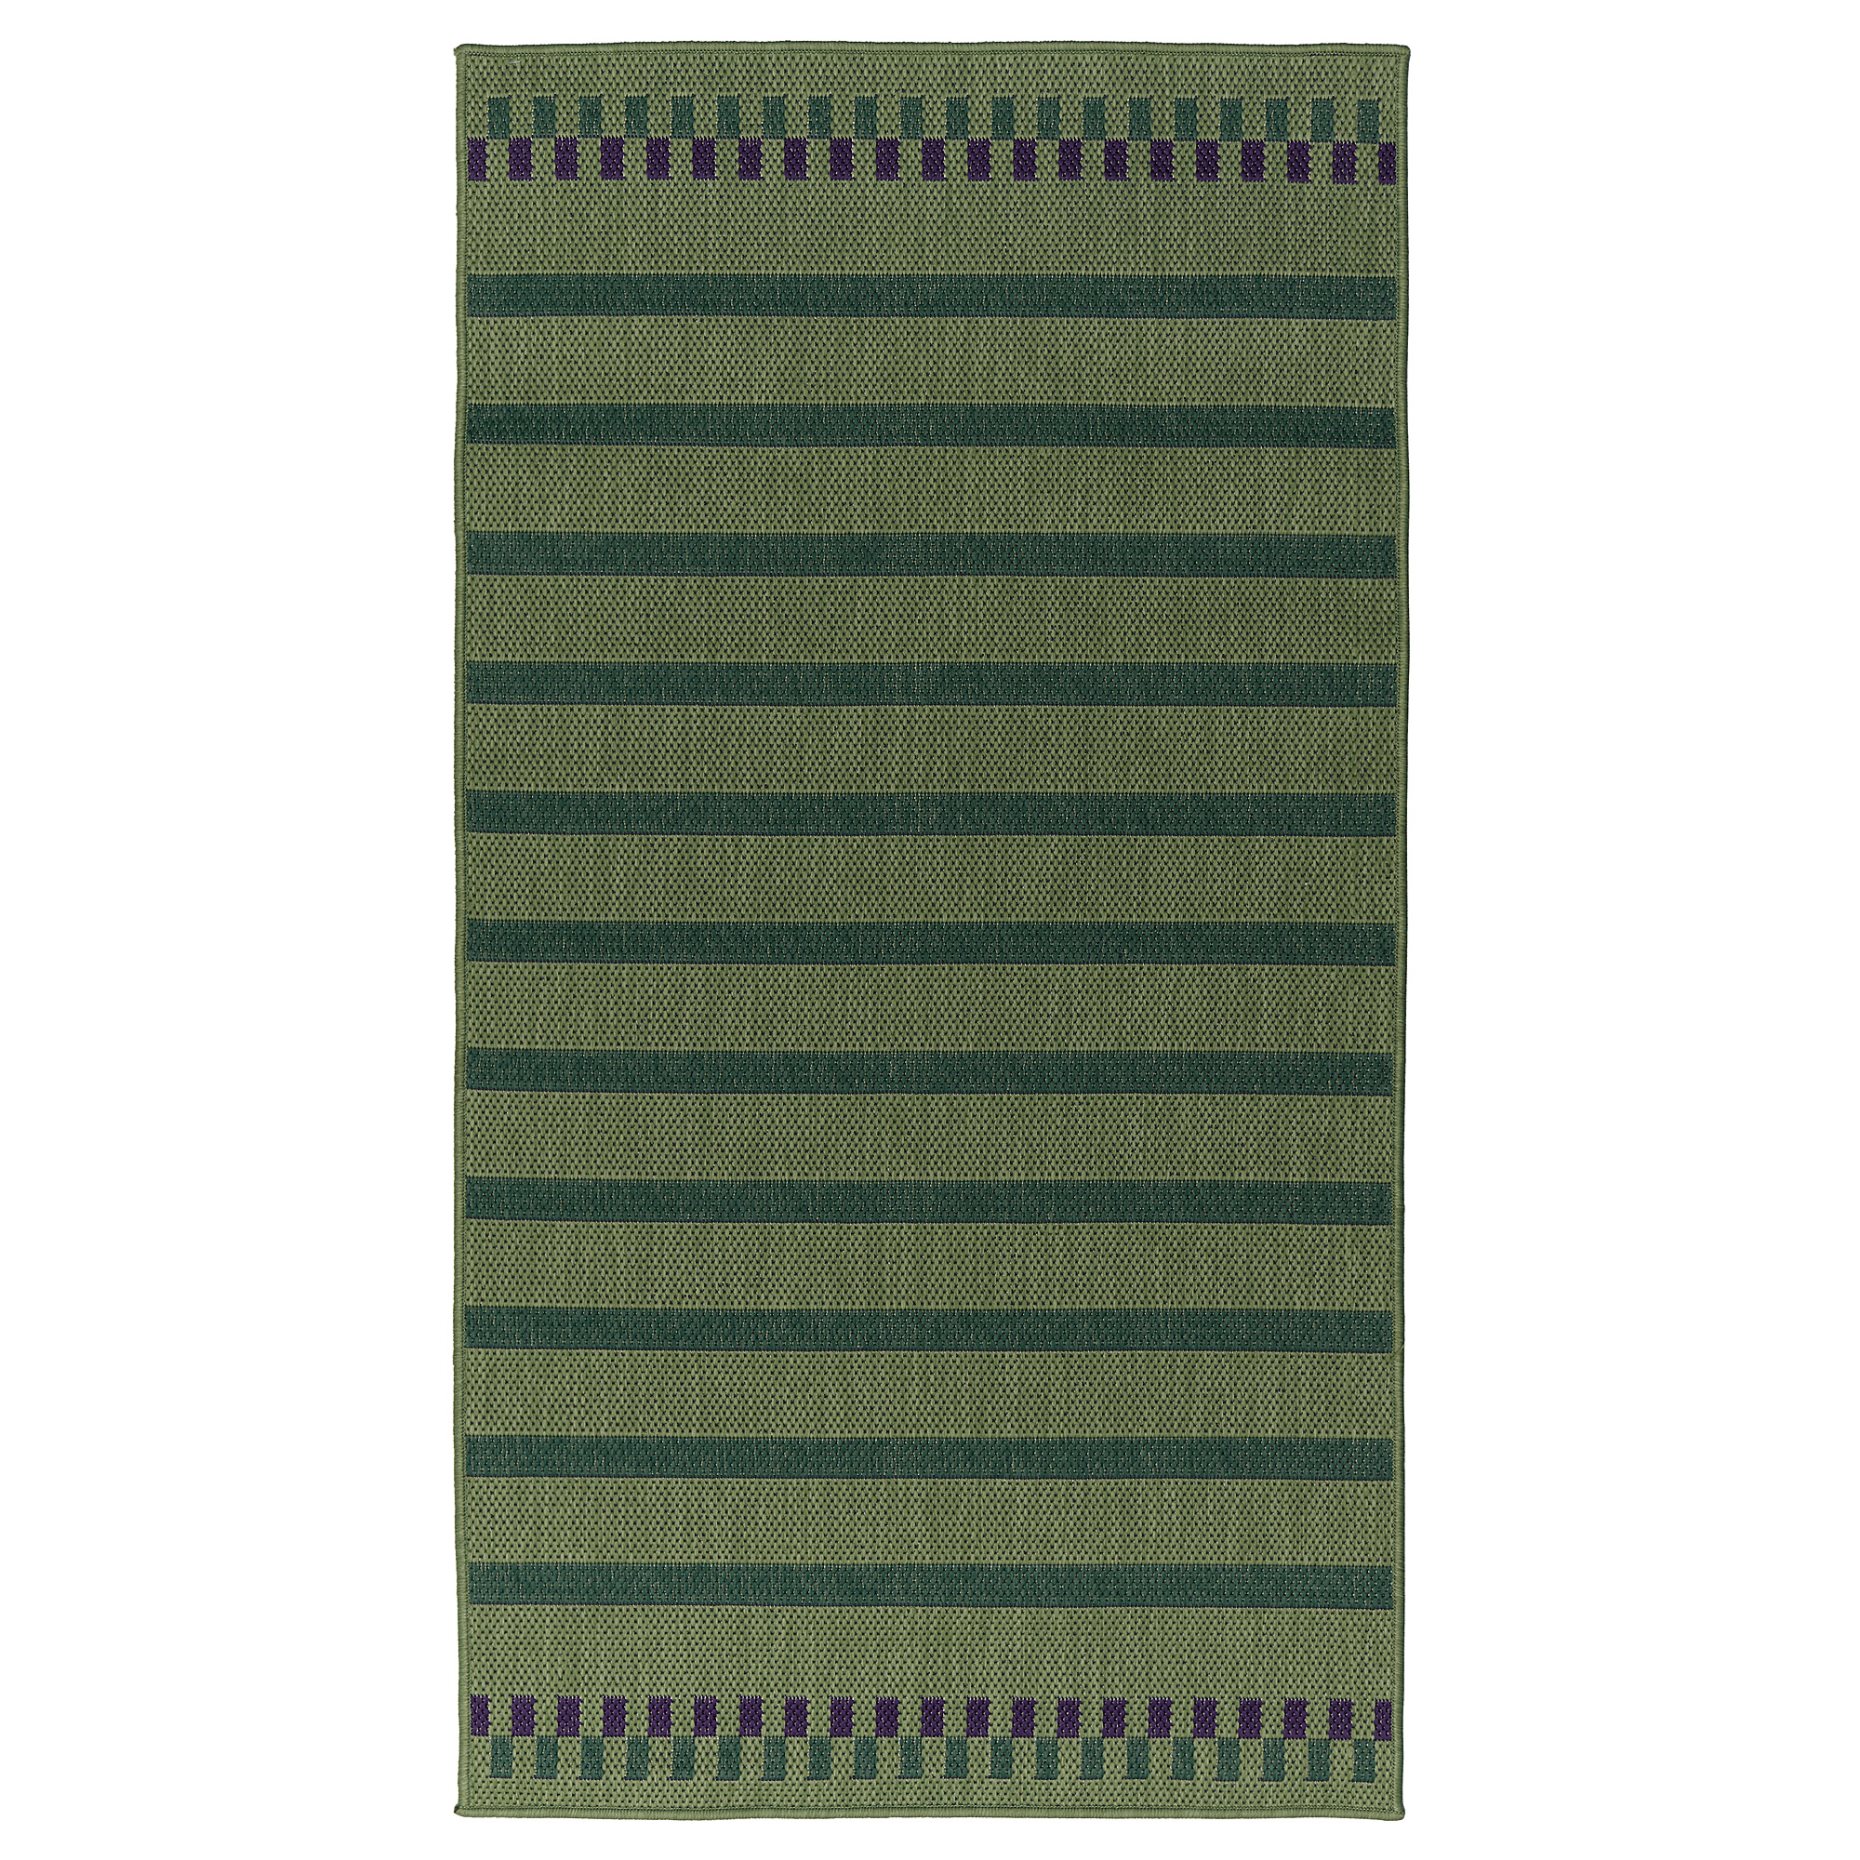 KORSNING, rug flatwoven/striped/in/outdoor, 80x150 cm, 005.532.32